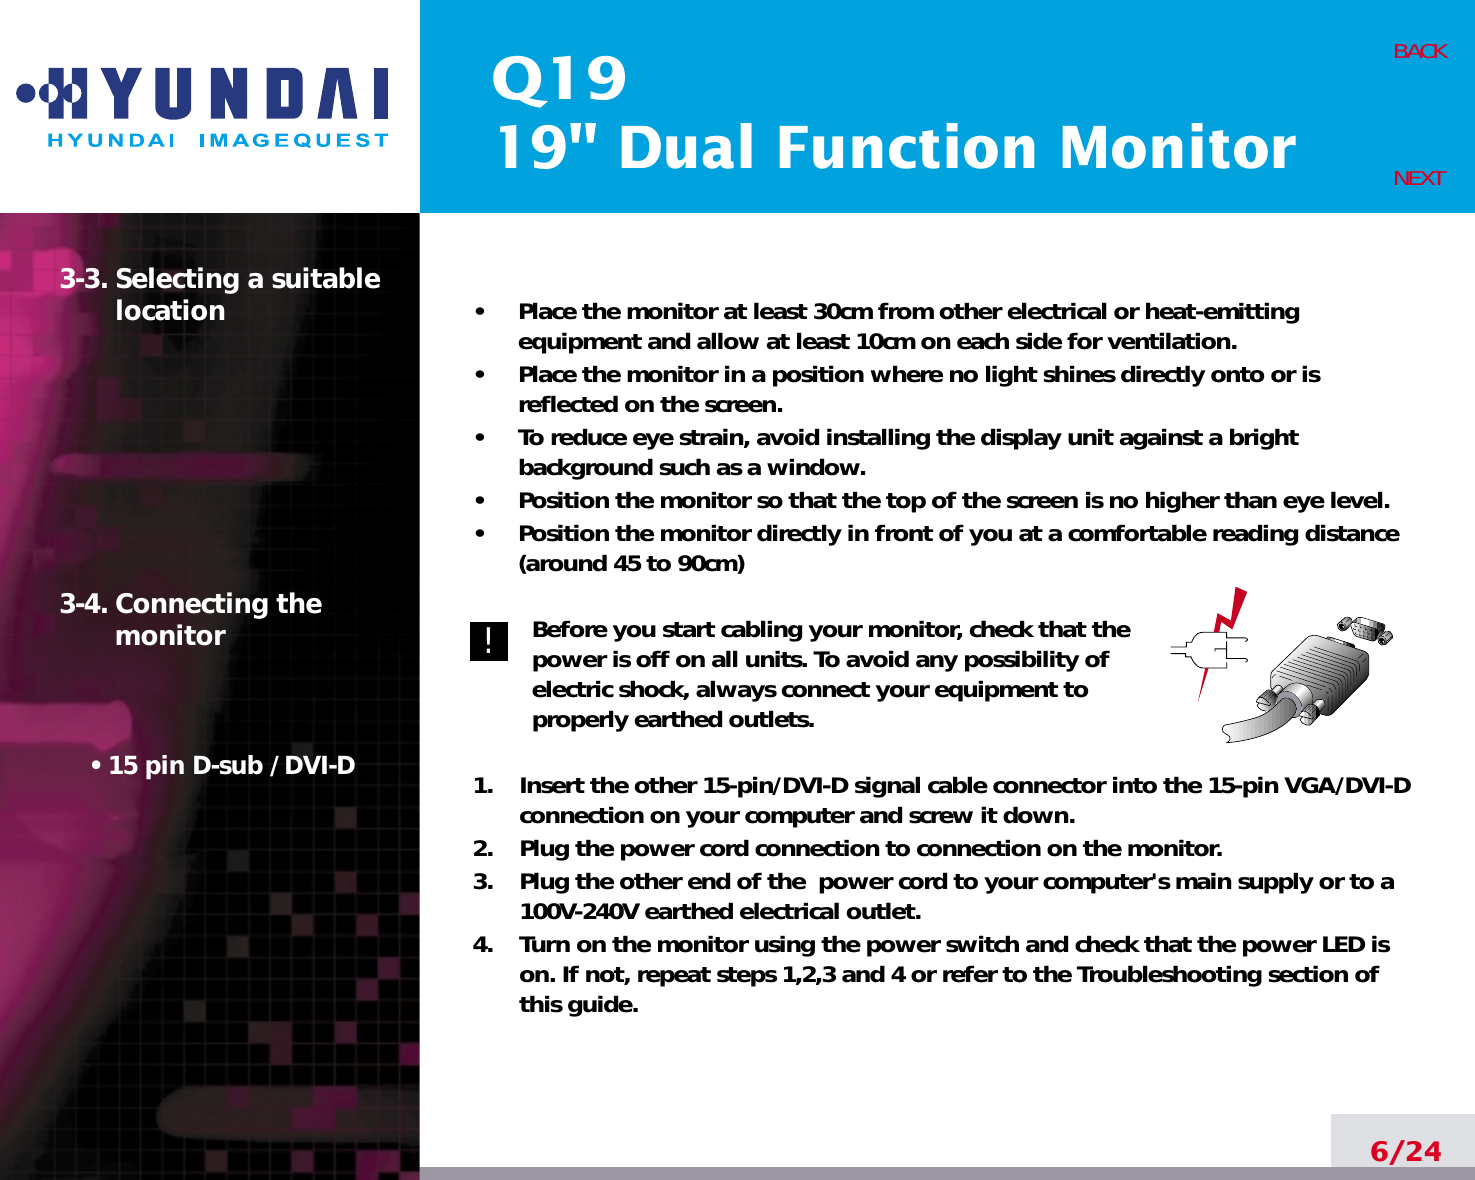 Q1919&quot; Dual Function Monitor6/24BACKNEXT3-3. Selecting a suitablelocation3-4. Connecting the monitor• 15 pin D-sub / DVI-D•     Place the monitor at least 30cm from other electrical or heat-emittingequipment and allow at least 10cm on each side for ventilation.•     Place the monitor in a position where no light shines directly onto or isreflected on the screen.•     To reduce eye strain, avoid installing the display unit against a brightbackground such as a window.•     Position the monitor so that the top of the screen is no higher than eye level.•     Position the monitor directly in front of you at a comfortable reading distance(around 45 to 90cm) Before you start cabling your monitor, check that thepower is off on all units. To avoid any possibility ofelectric shock, always connect your equipment toproperly earthed outlets.1.    Insert the other 15-pin/DVI-D signal cable connector into the 15-pin VGA/DVI-Dconnection on your computer and screw it down. 2.    Plug the power cord connection to connection on the monitor.3.    Plug the other end of the  power cord to your computer&apos;s main supply or to a100V-240V earthed electrical outlet.4.    Turn on the monitor using the power switch and check that the power LED ison. If not, repeat steps 1,2,3 and 4 or refer to the Troubleshooting section ofthis guide.!!